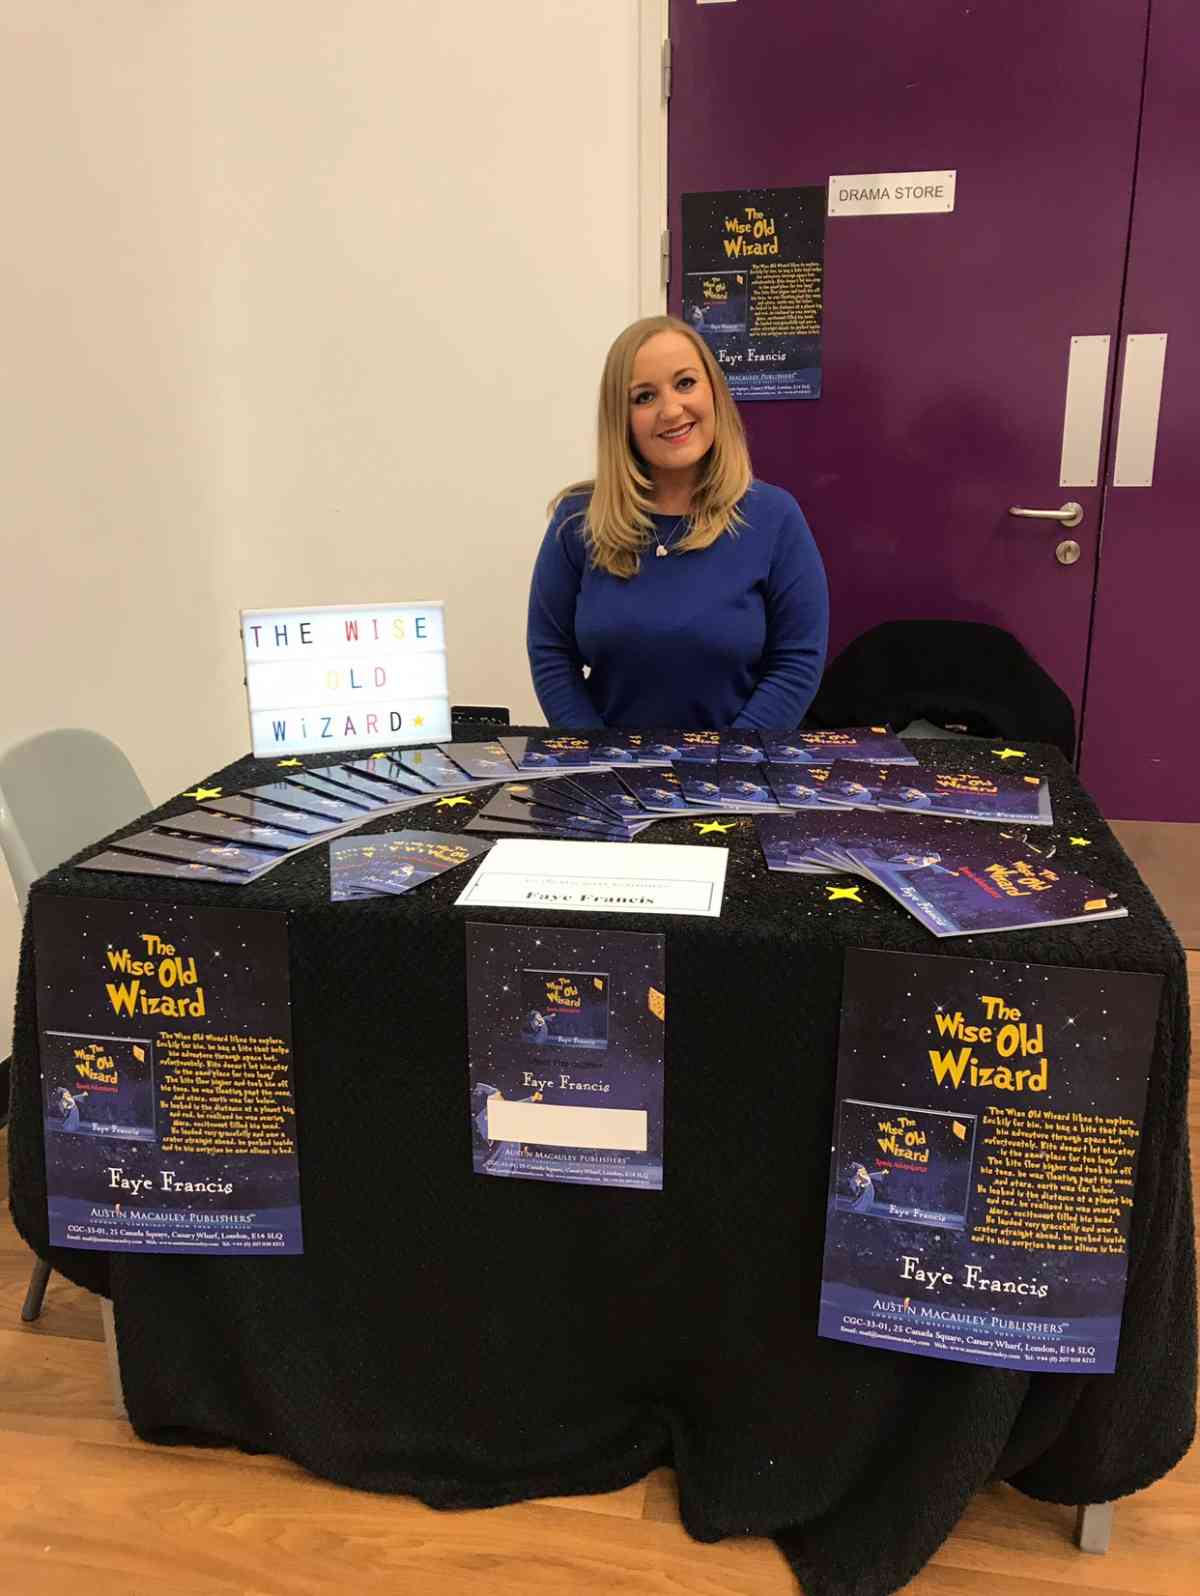 The-Author-Of-‘The-Wise-Old-Wizard’-Faye-Francis-Attended-An-Event-Held-at-Holmesdale-School-in-Snodland